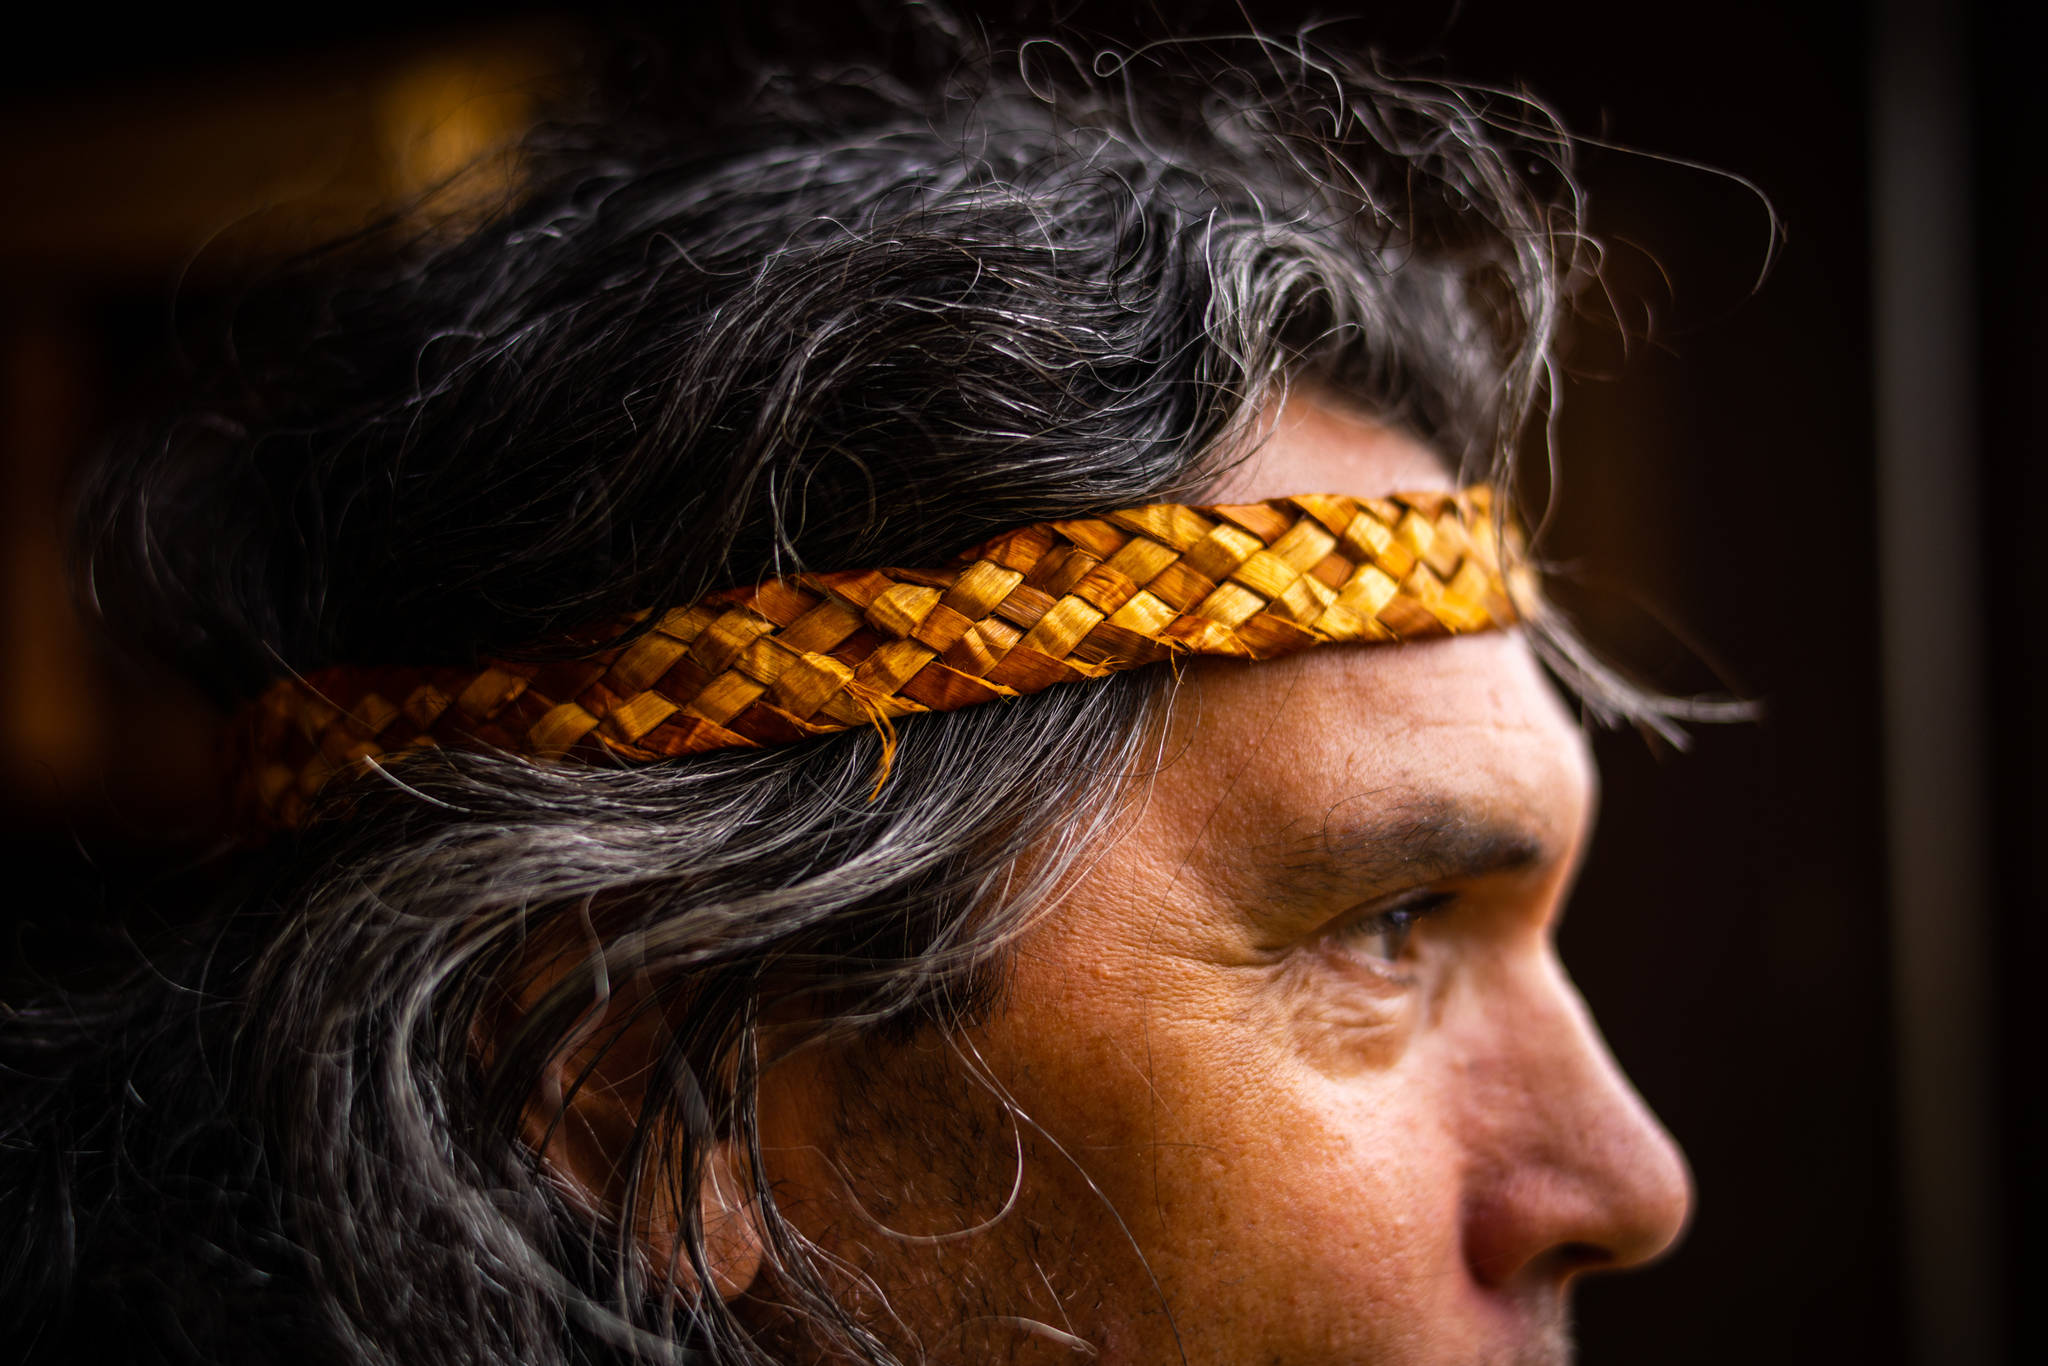 Michael Jones is a Kasaan artist and historical with the Organized Village of Kasaan. He wears a cedar headband he wove during the workshop. Jones is passionate about protecting and sharing the rich cultural history tied to the communities on Prince of Wales Island. (Courtesy Photo / Bethany Sonsini Goodrich)